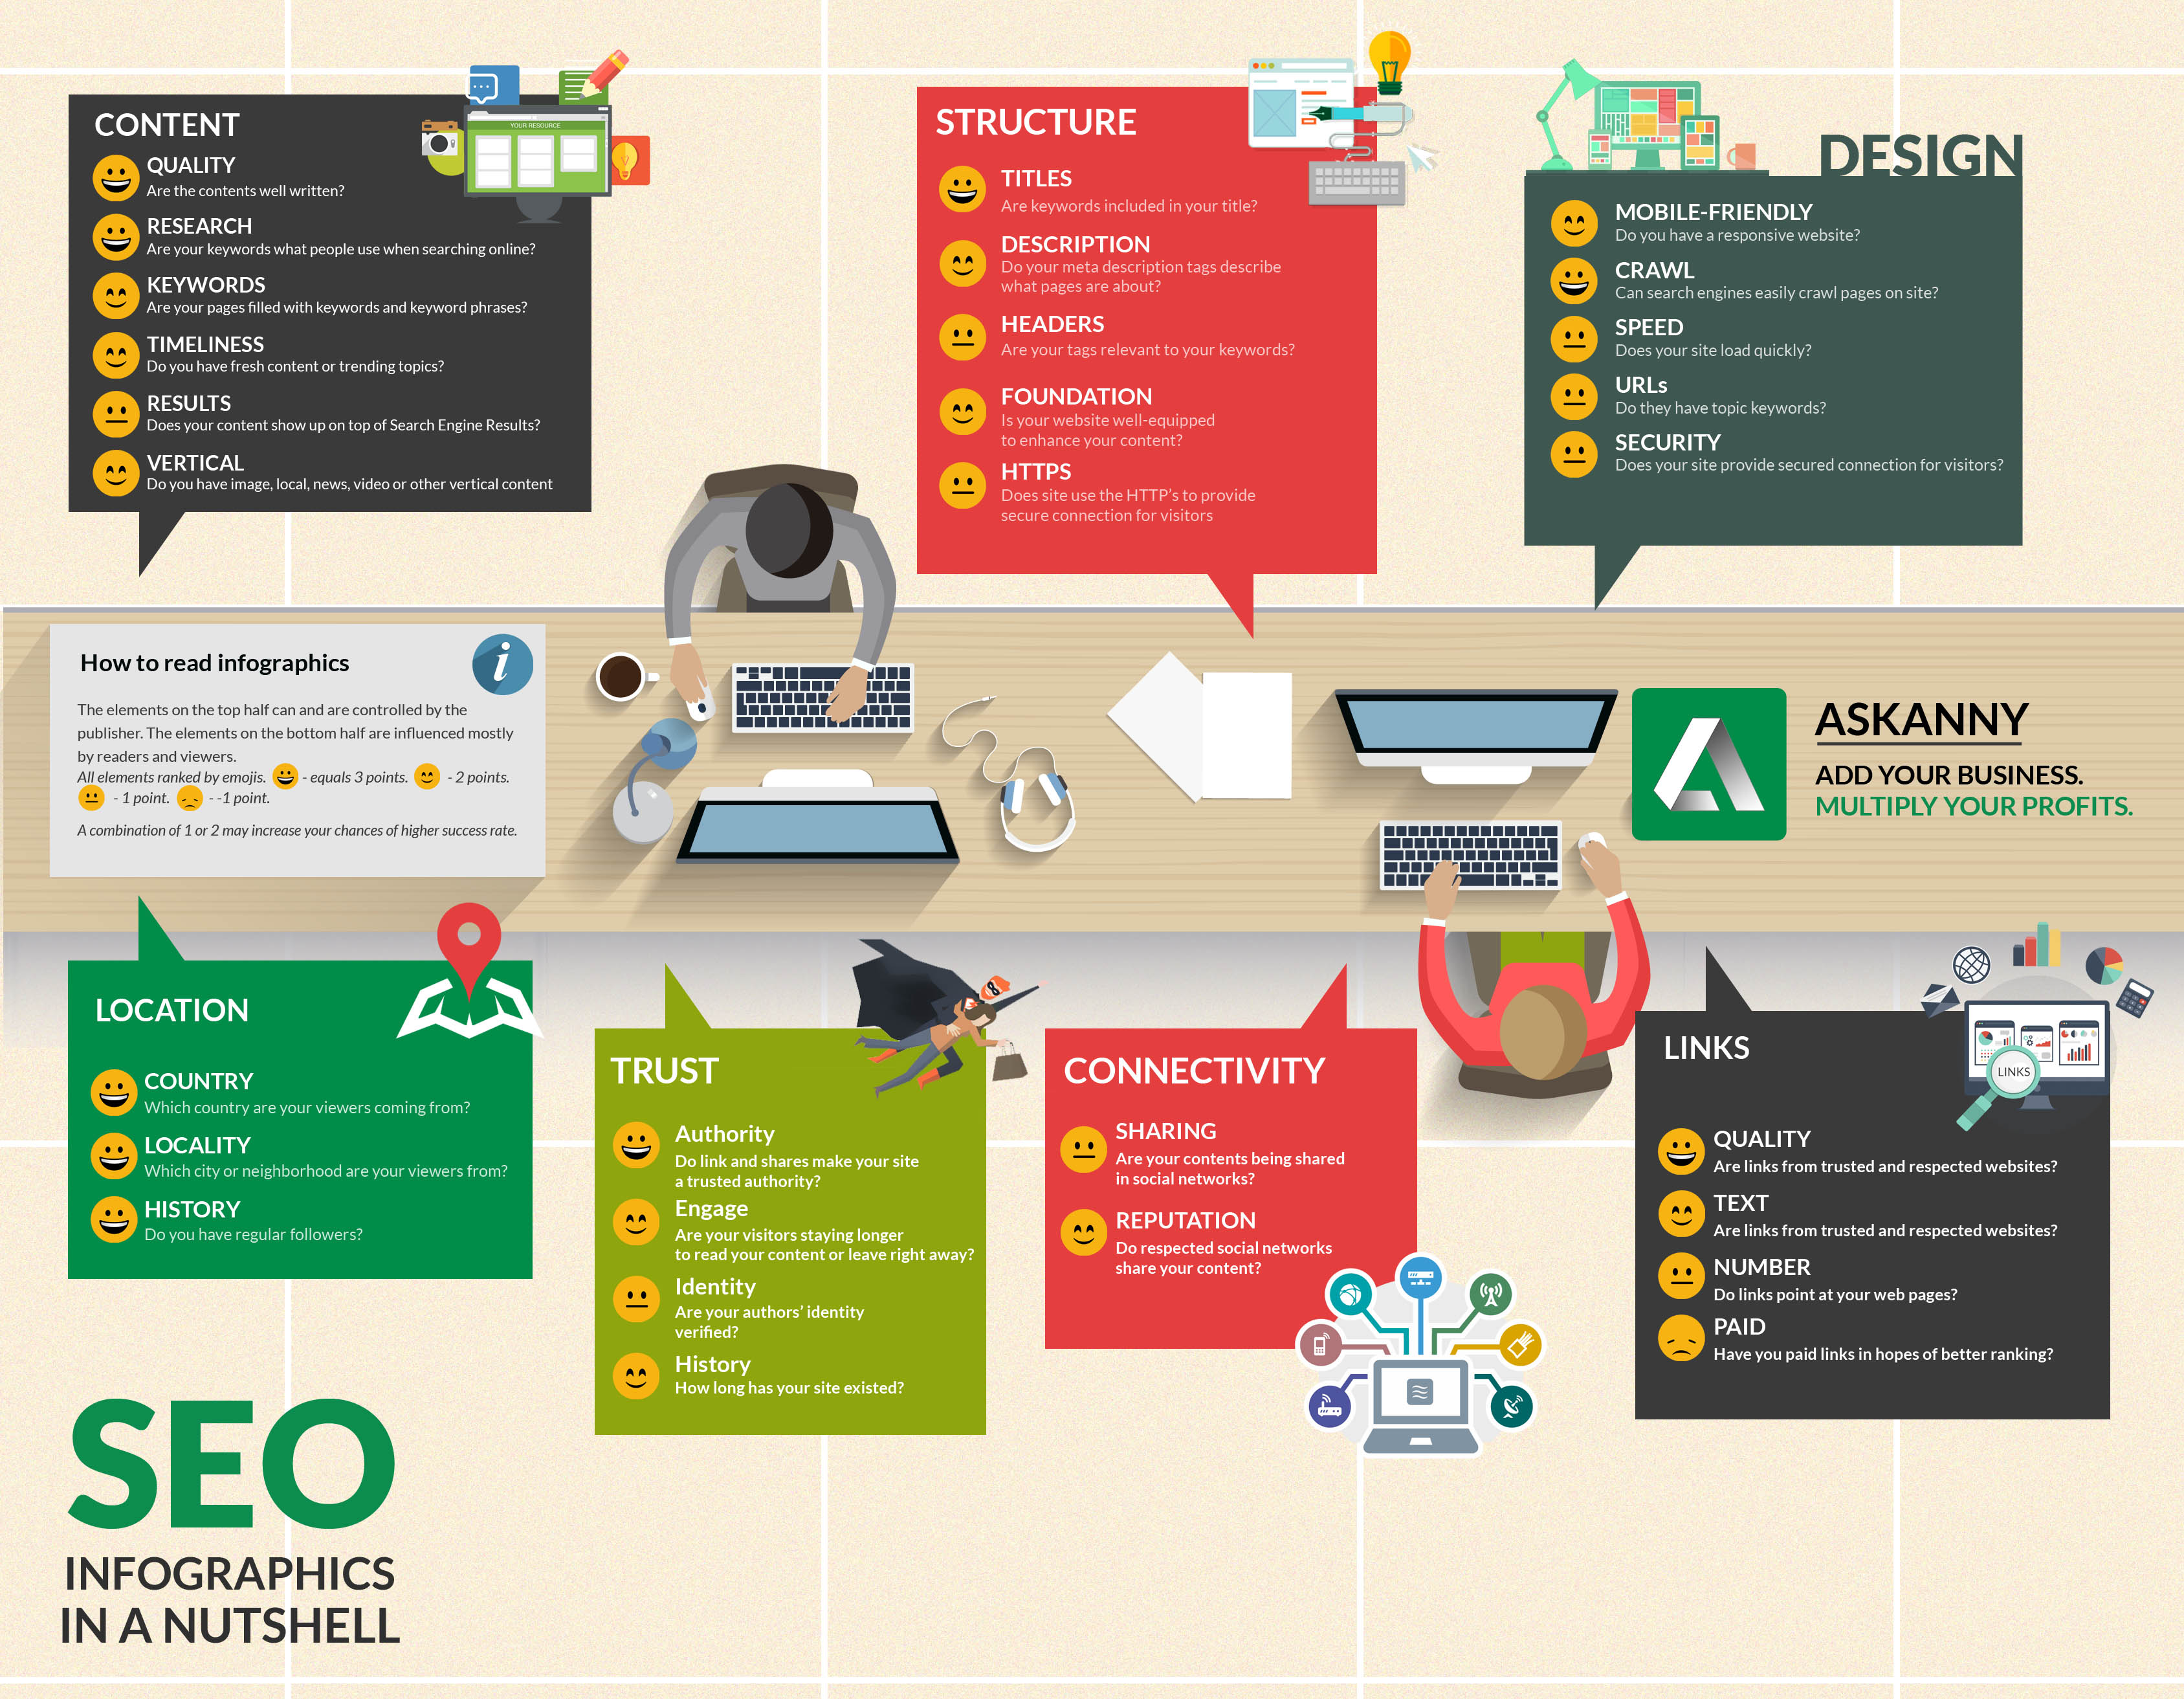 SEO Infographics in a Nutshell